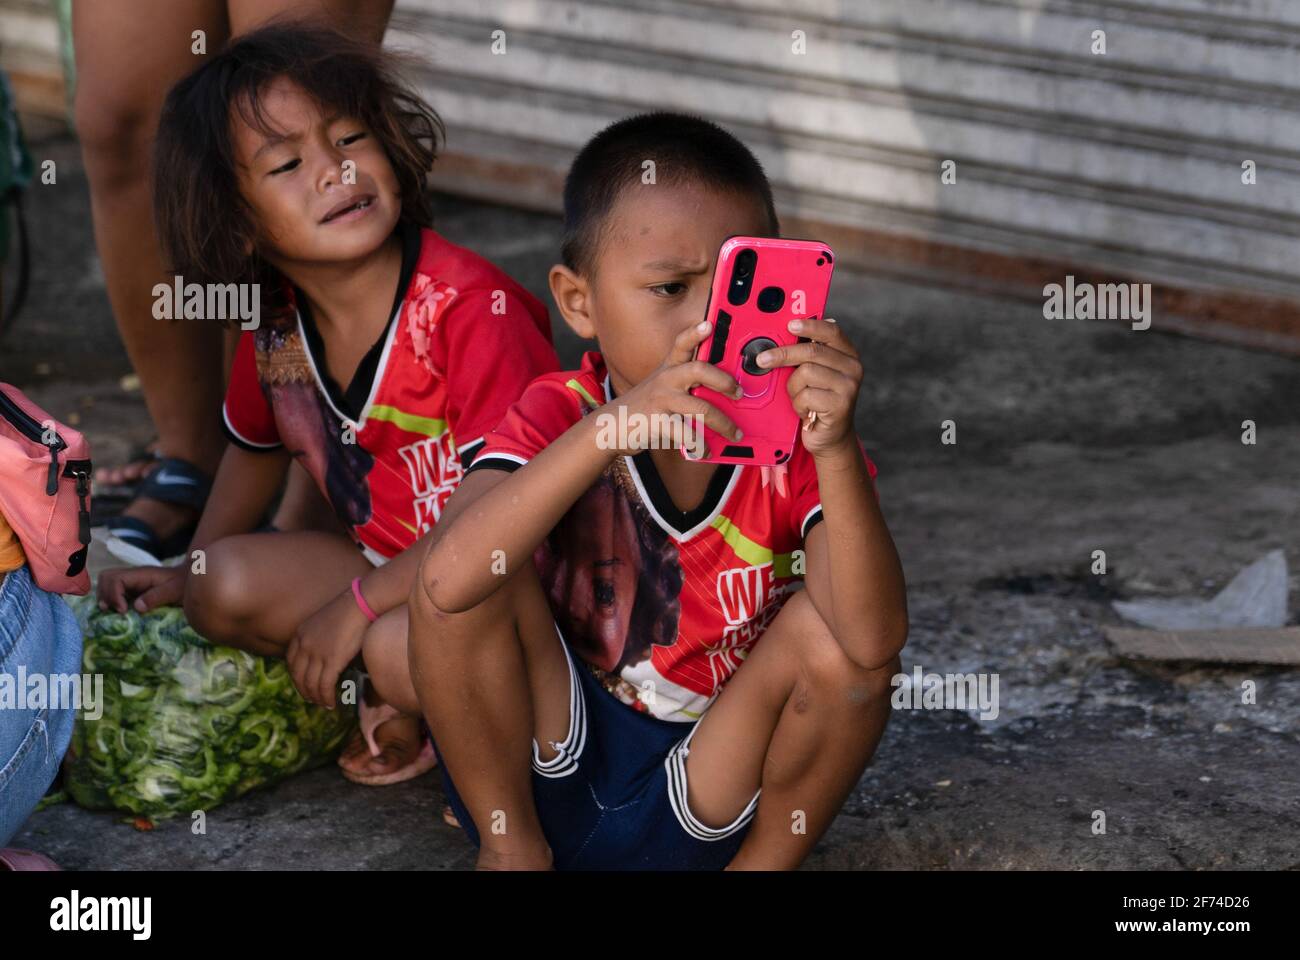 A young child in a poor area of Cebu City, Philippines using a mobile phone whilst a young girl looks on Stock Photo